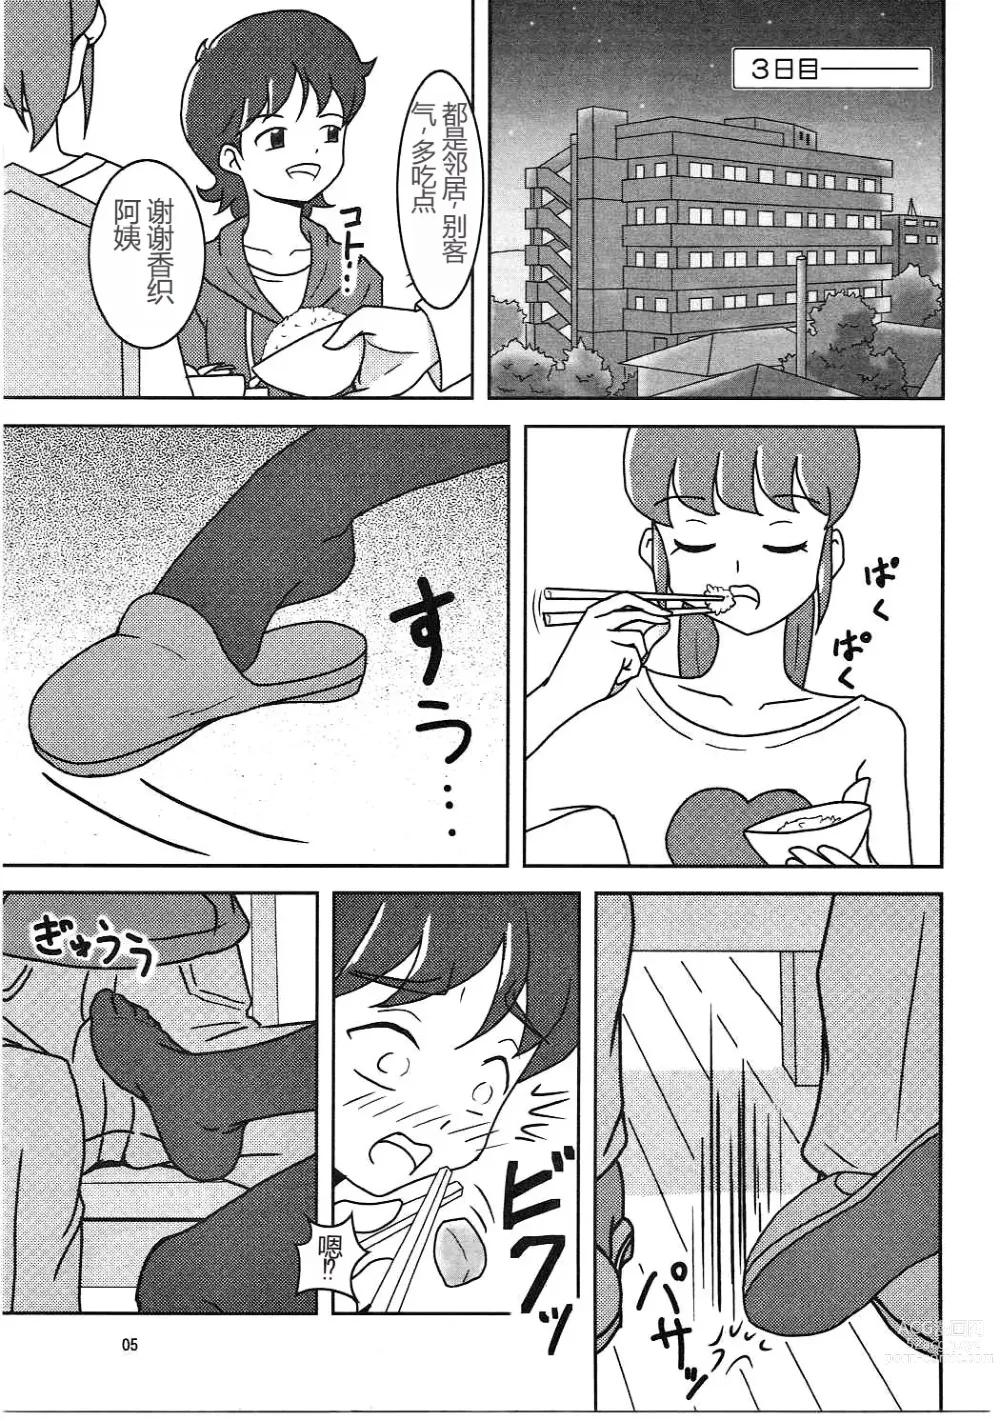 Page 6 of doujinshi HappinessCharge Zuricure!